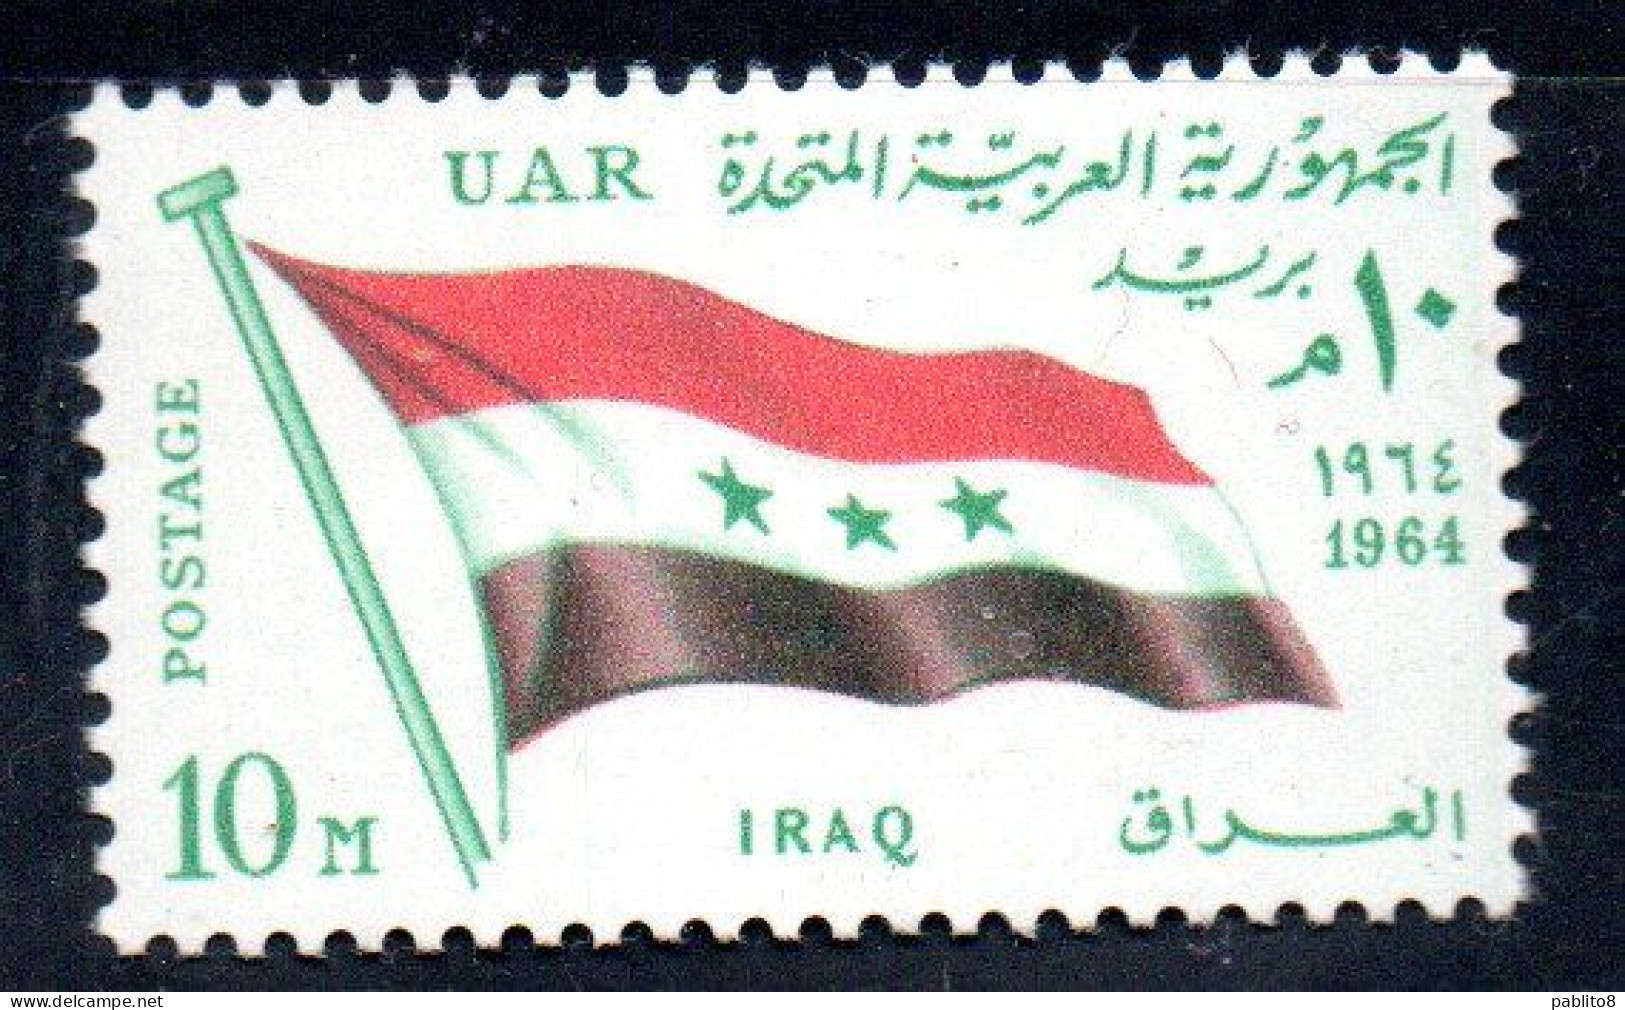 UAR EGYPT EGITTO 1964 SECOND MEETING OF HEADS STATE ARAB LEAGUE FLAG OF IRAQ 10m MNH - Unused Stamps